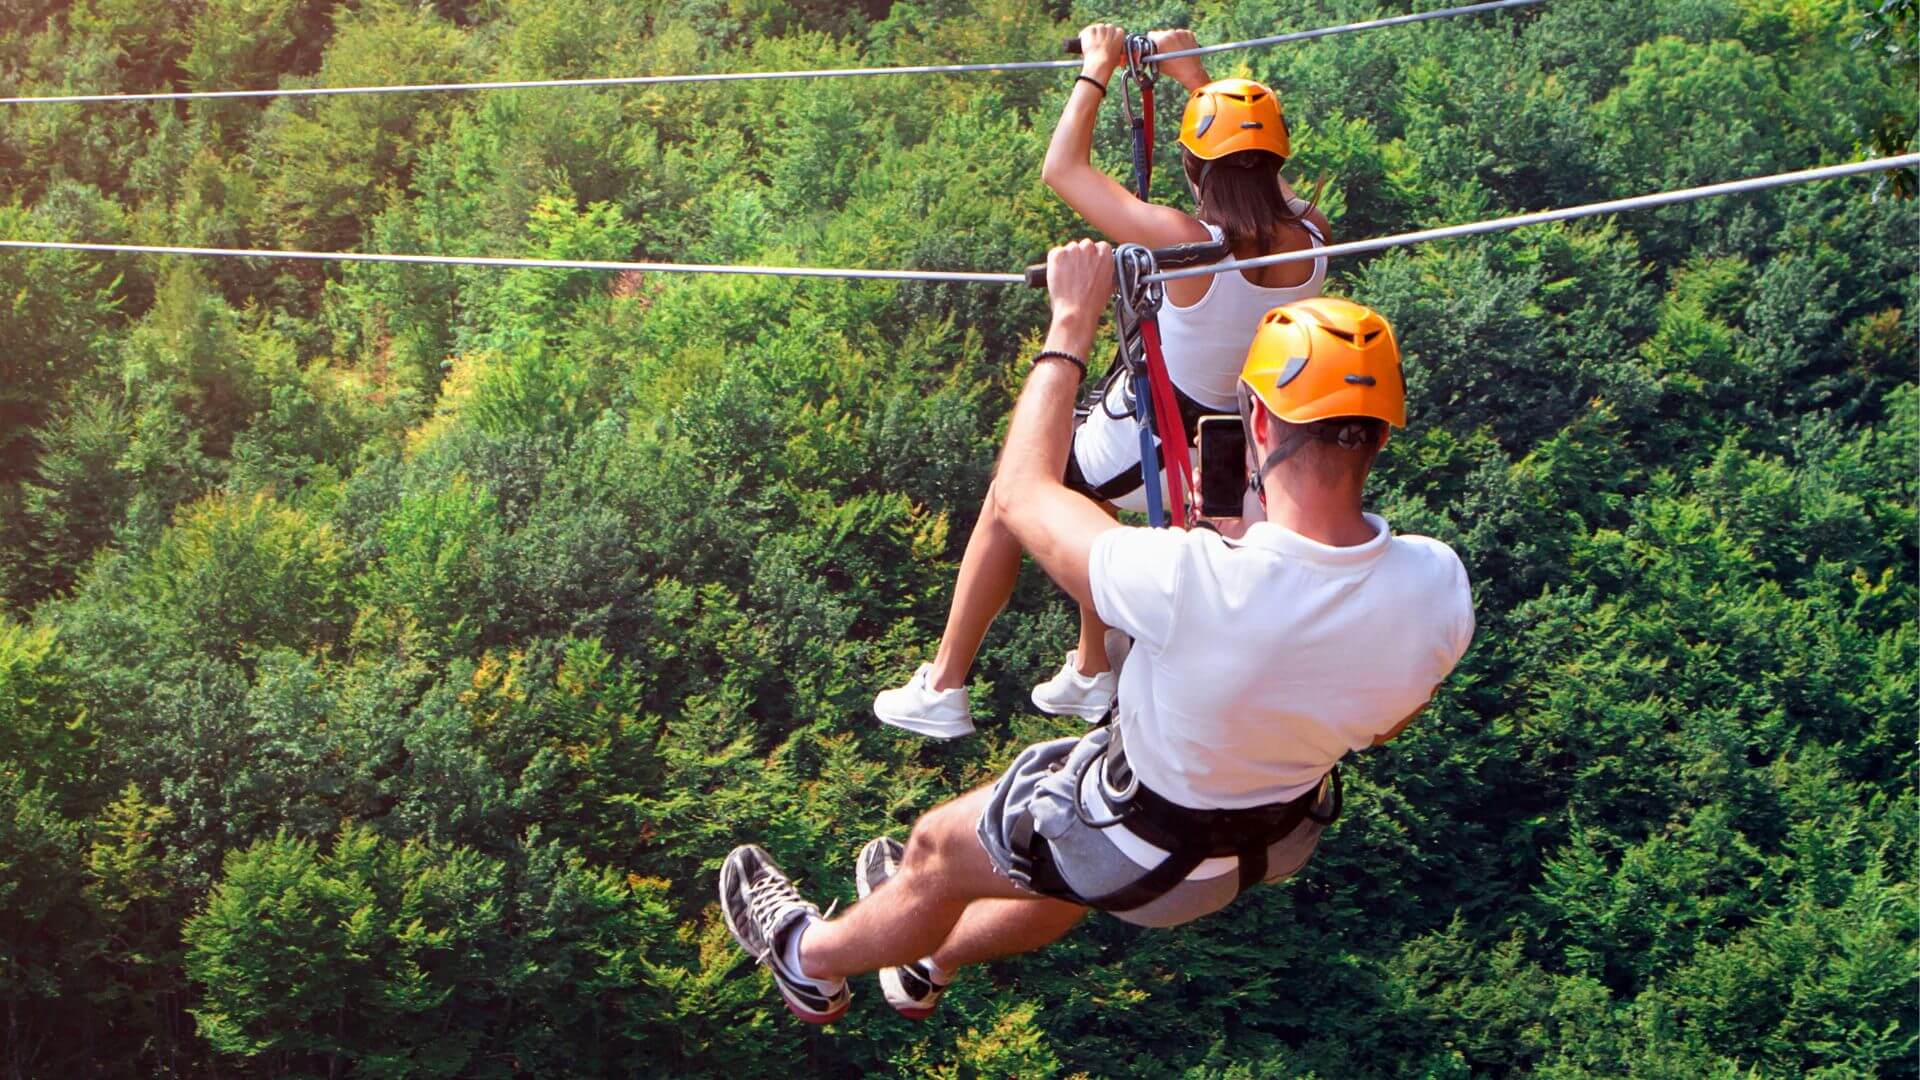 Two people riding on a zipline